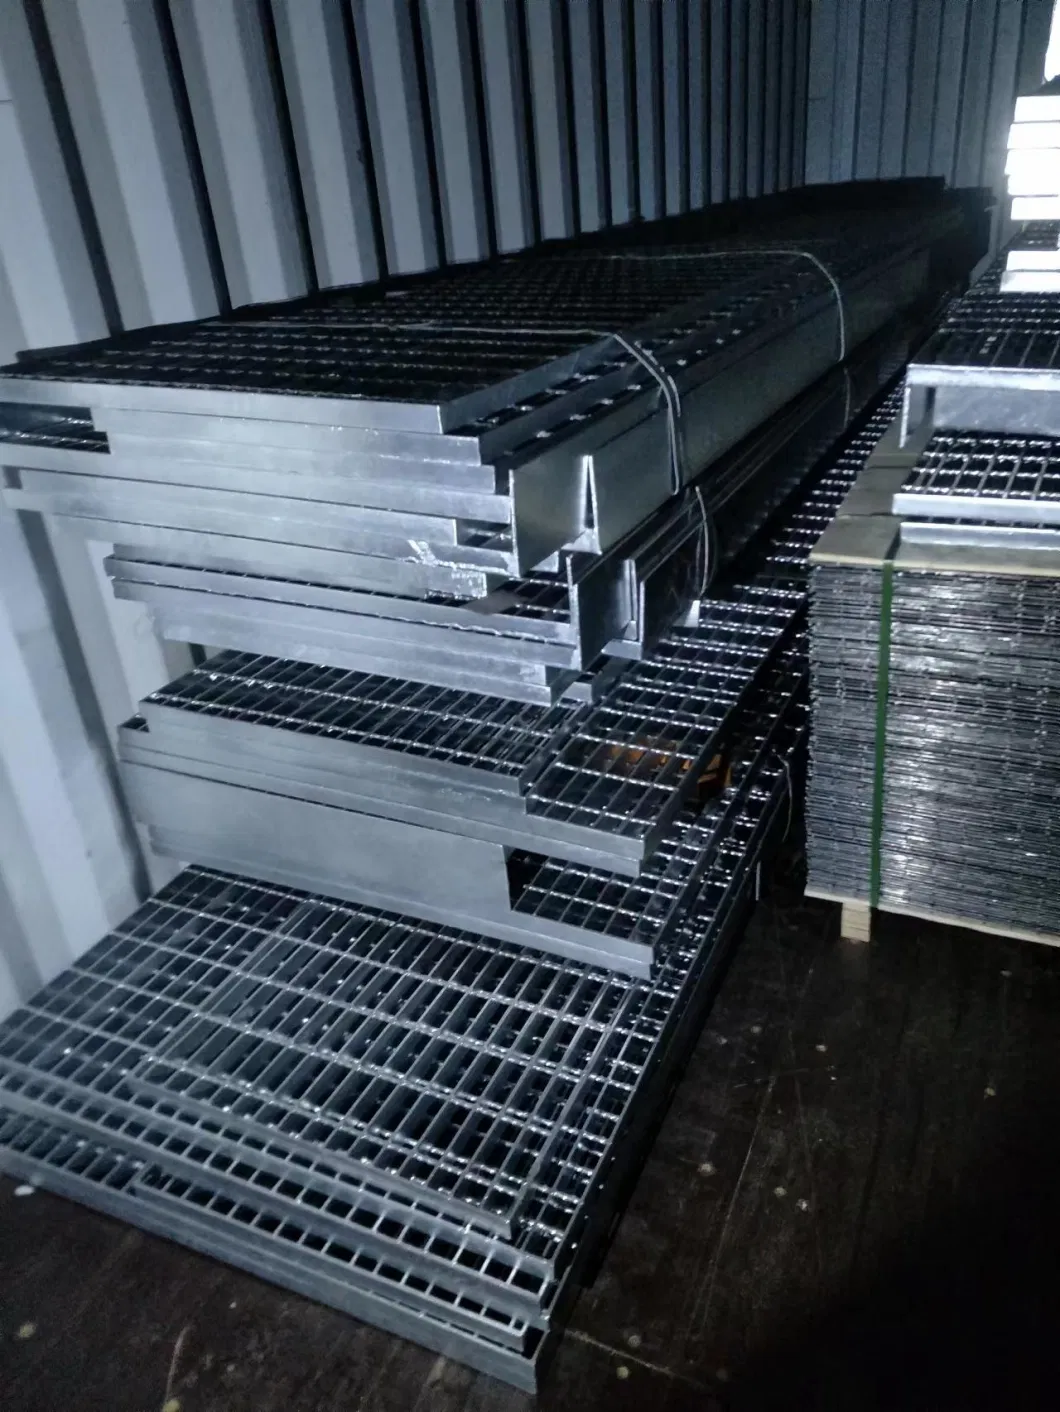 High Quality Hot Dipped Galvanized Press Welded Steel Bar Grating for Walkways/Flooring